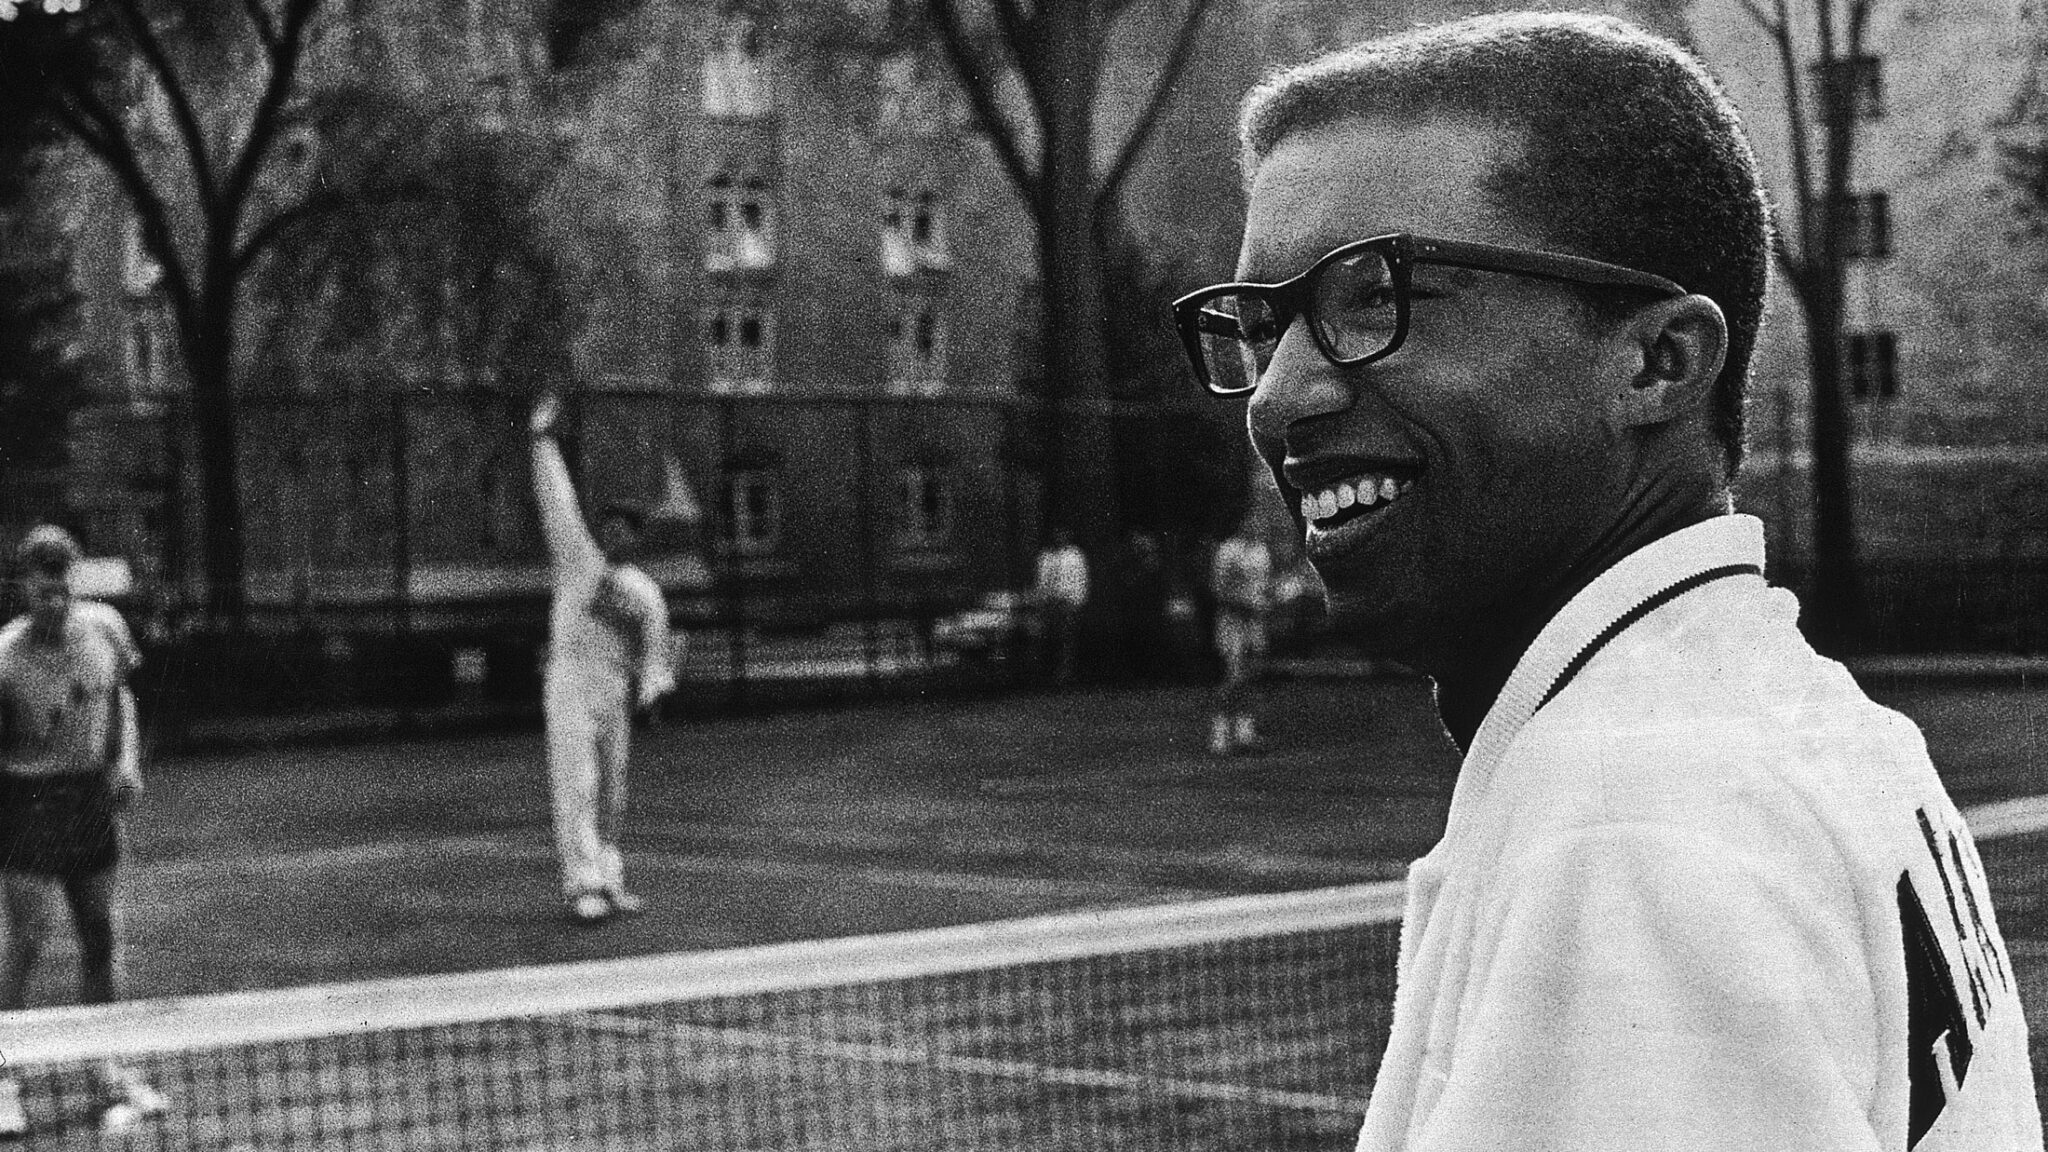 what was happening in sports for african americans during the 1960s